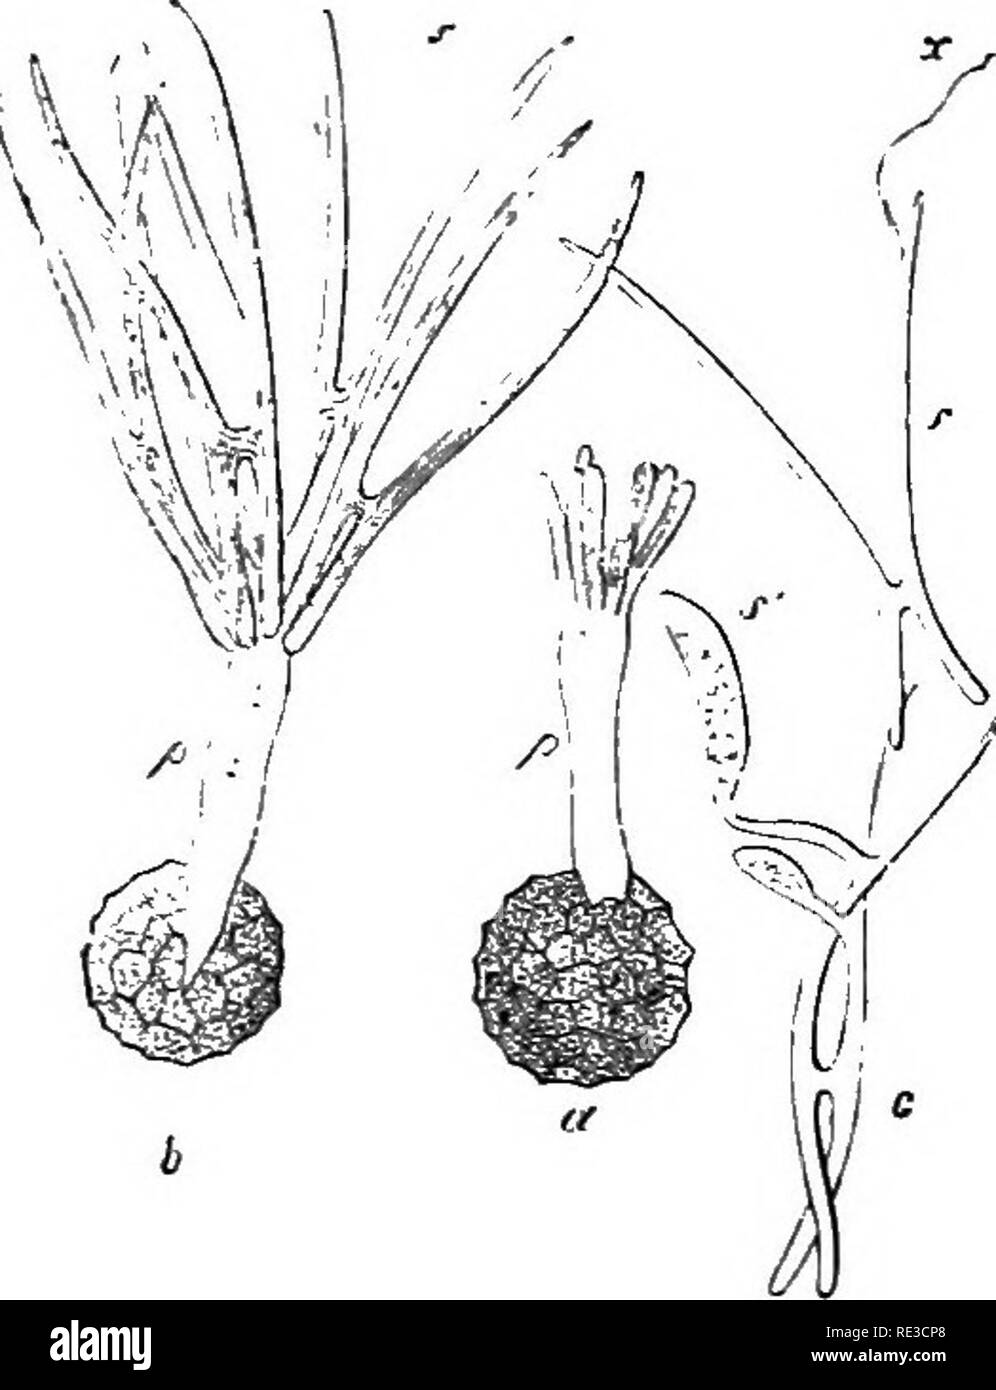 . A handbook of cryptogamic botany. Cryptogams. 35° FUNGI cuous as causing diseases of grasses. As a rule the attack of the para- site is limited to one special region of the host, e.g. the ovary, or the whole flower, or the leaf, or the stem, or even, in a few cases, the root; and when the fungus has attained its maturity, the result commonly is that the part affected has been destroyed with the exception of the epi- derm or integument and the remains of vascular tissue, and is replaced by a powdery mass of brown or black resting-spores. The mycele sends its long thin hyphse mostly along the  Stock Photo